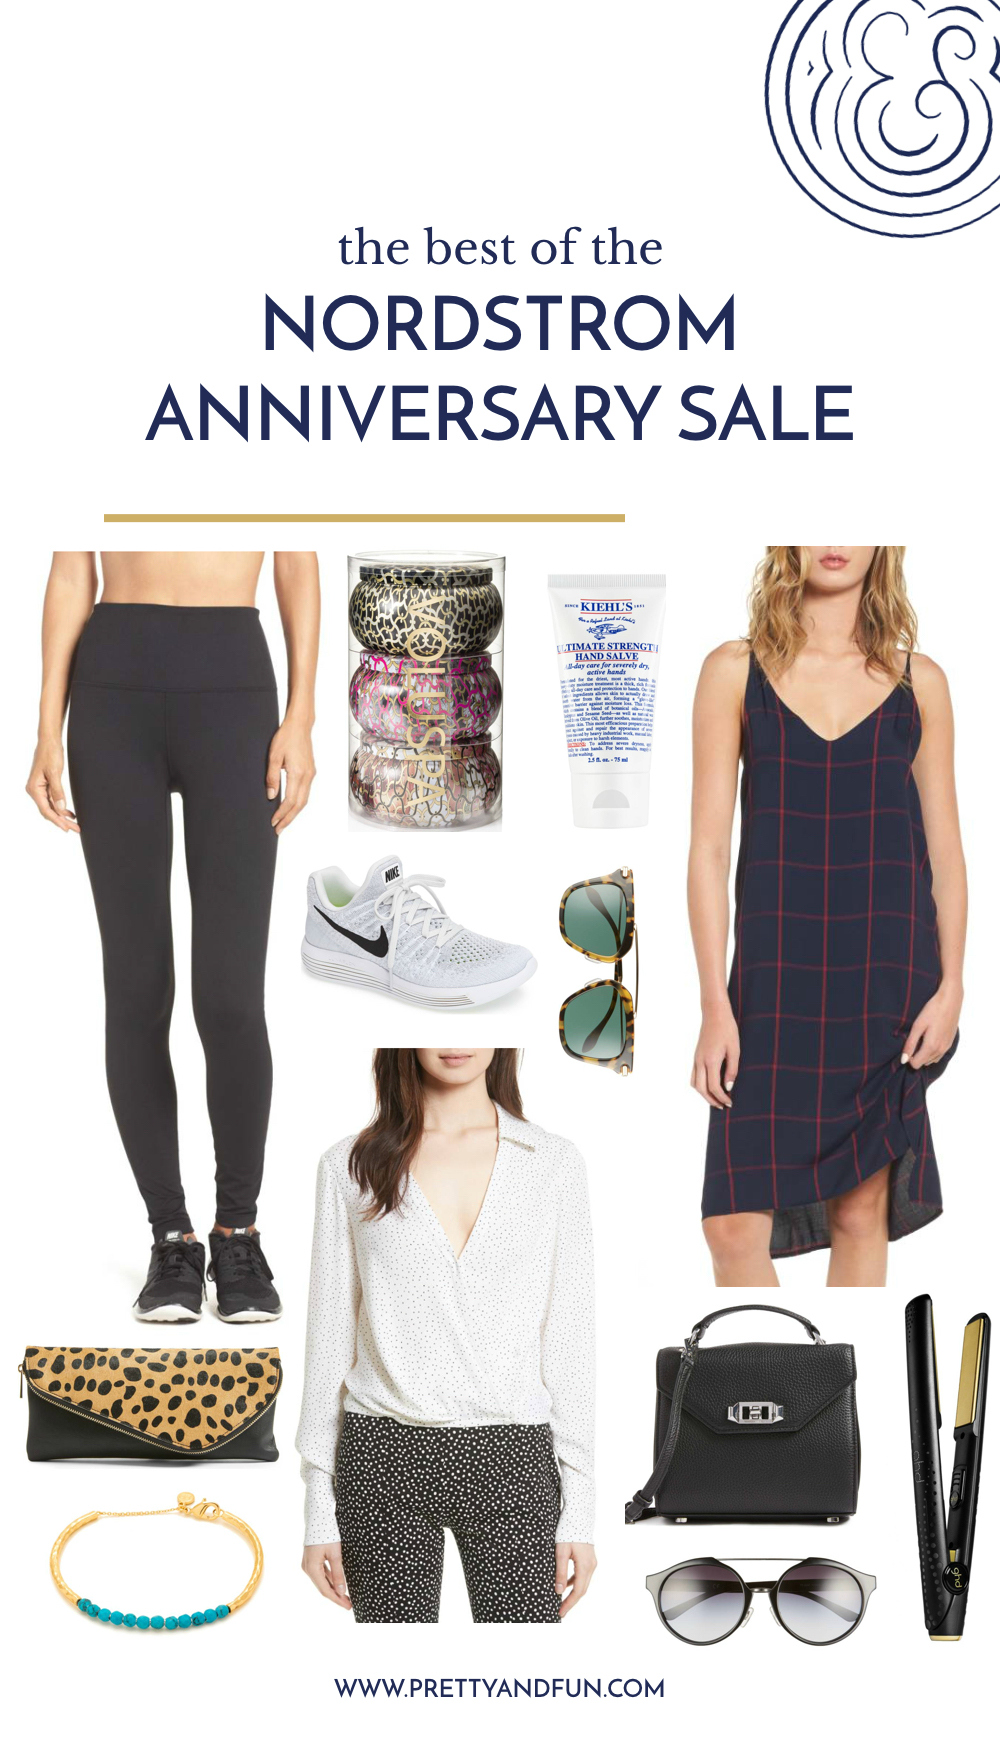 Best of the Nordstrom Anniversary Sale.